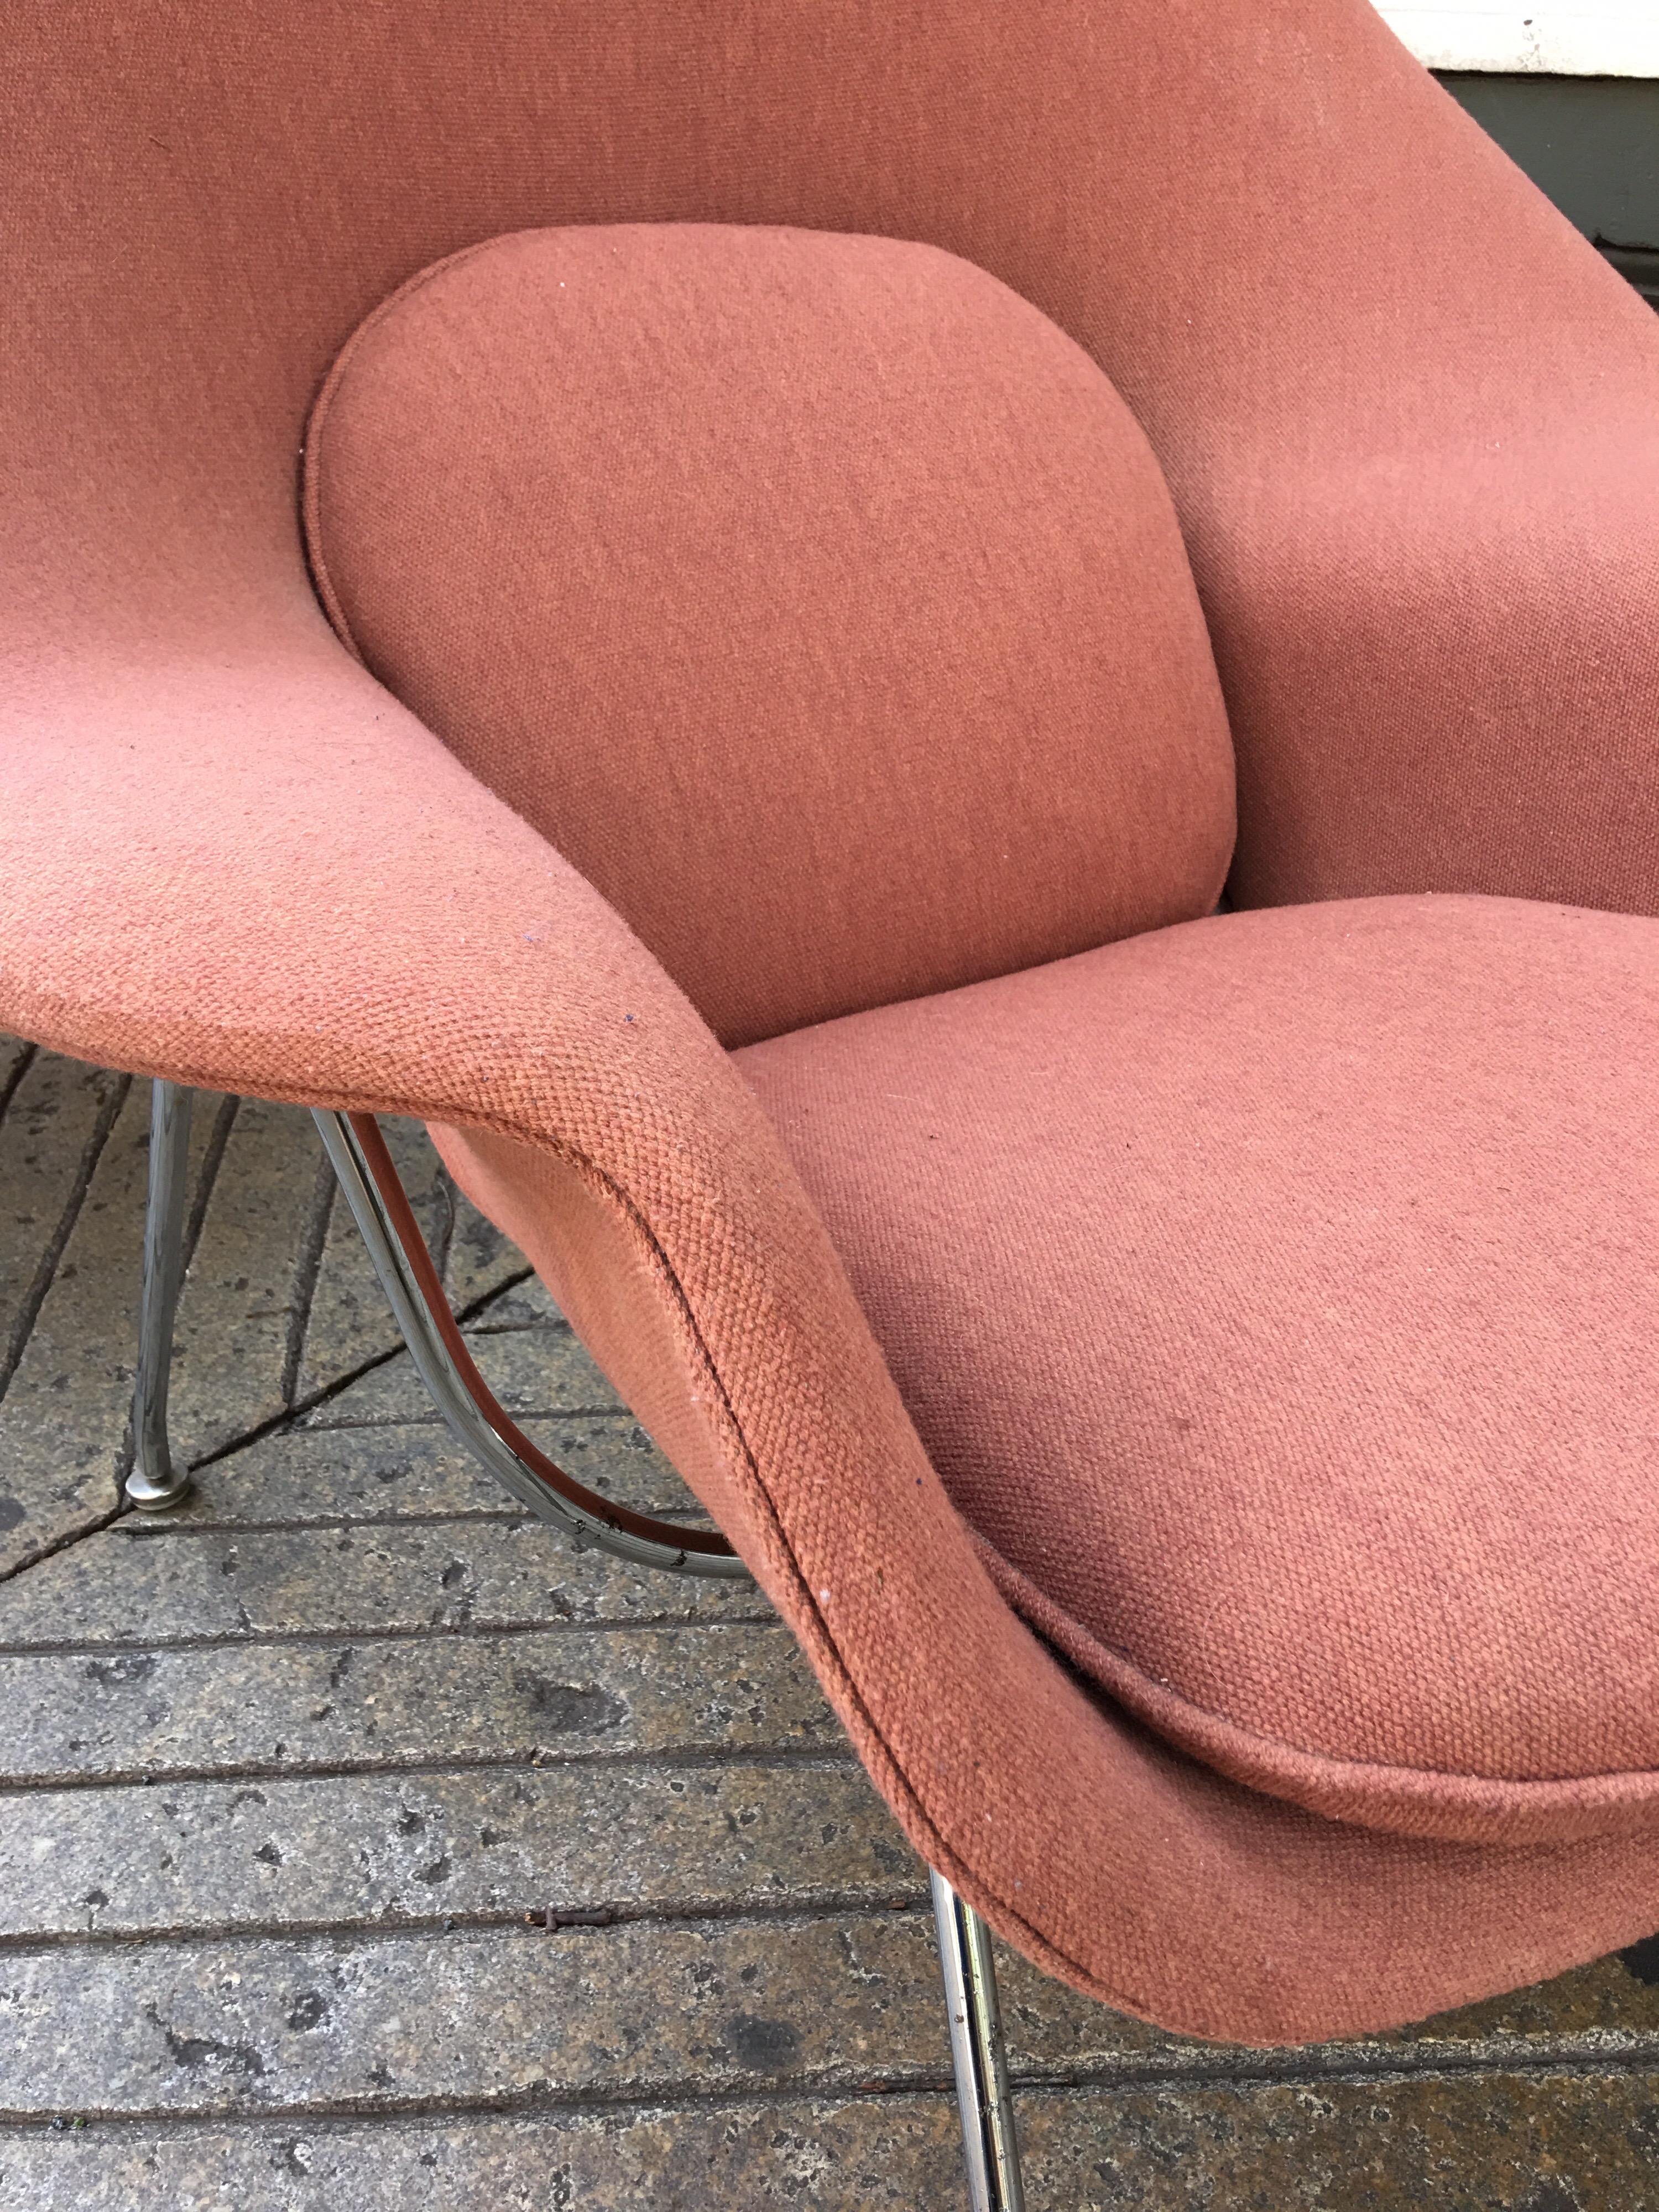 American Saarinen for Knoll Womb Chair and Ottoman